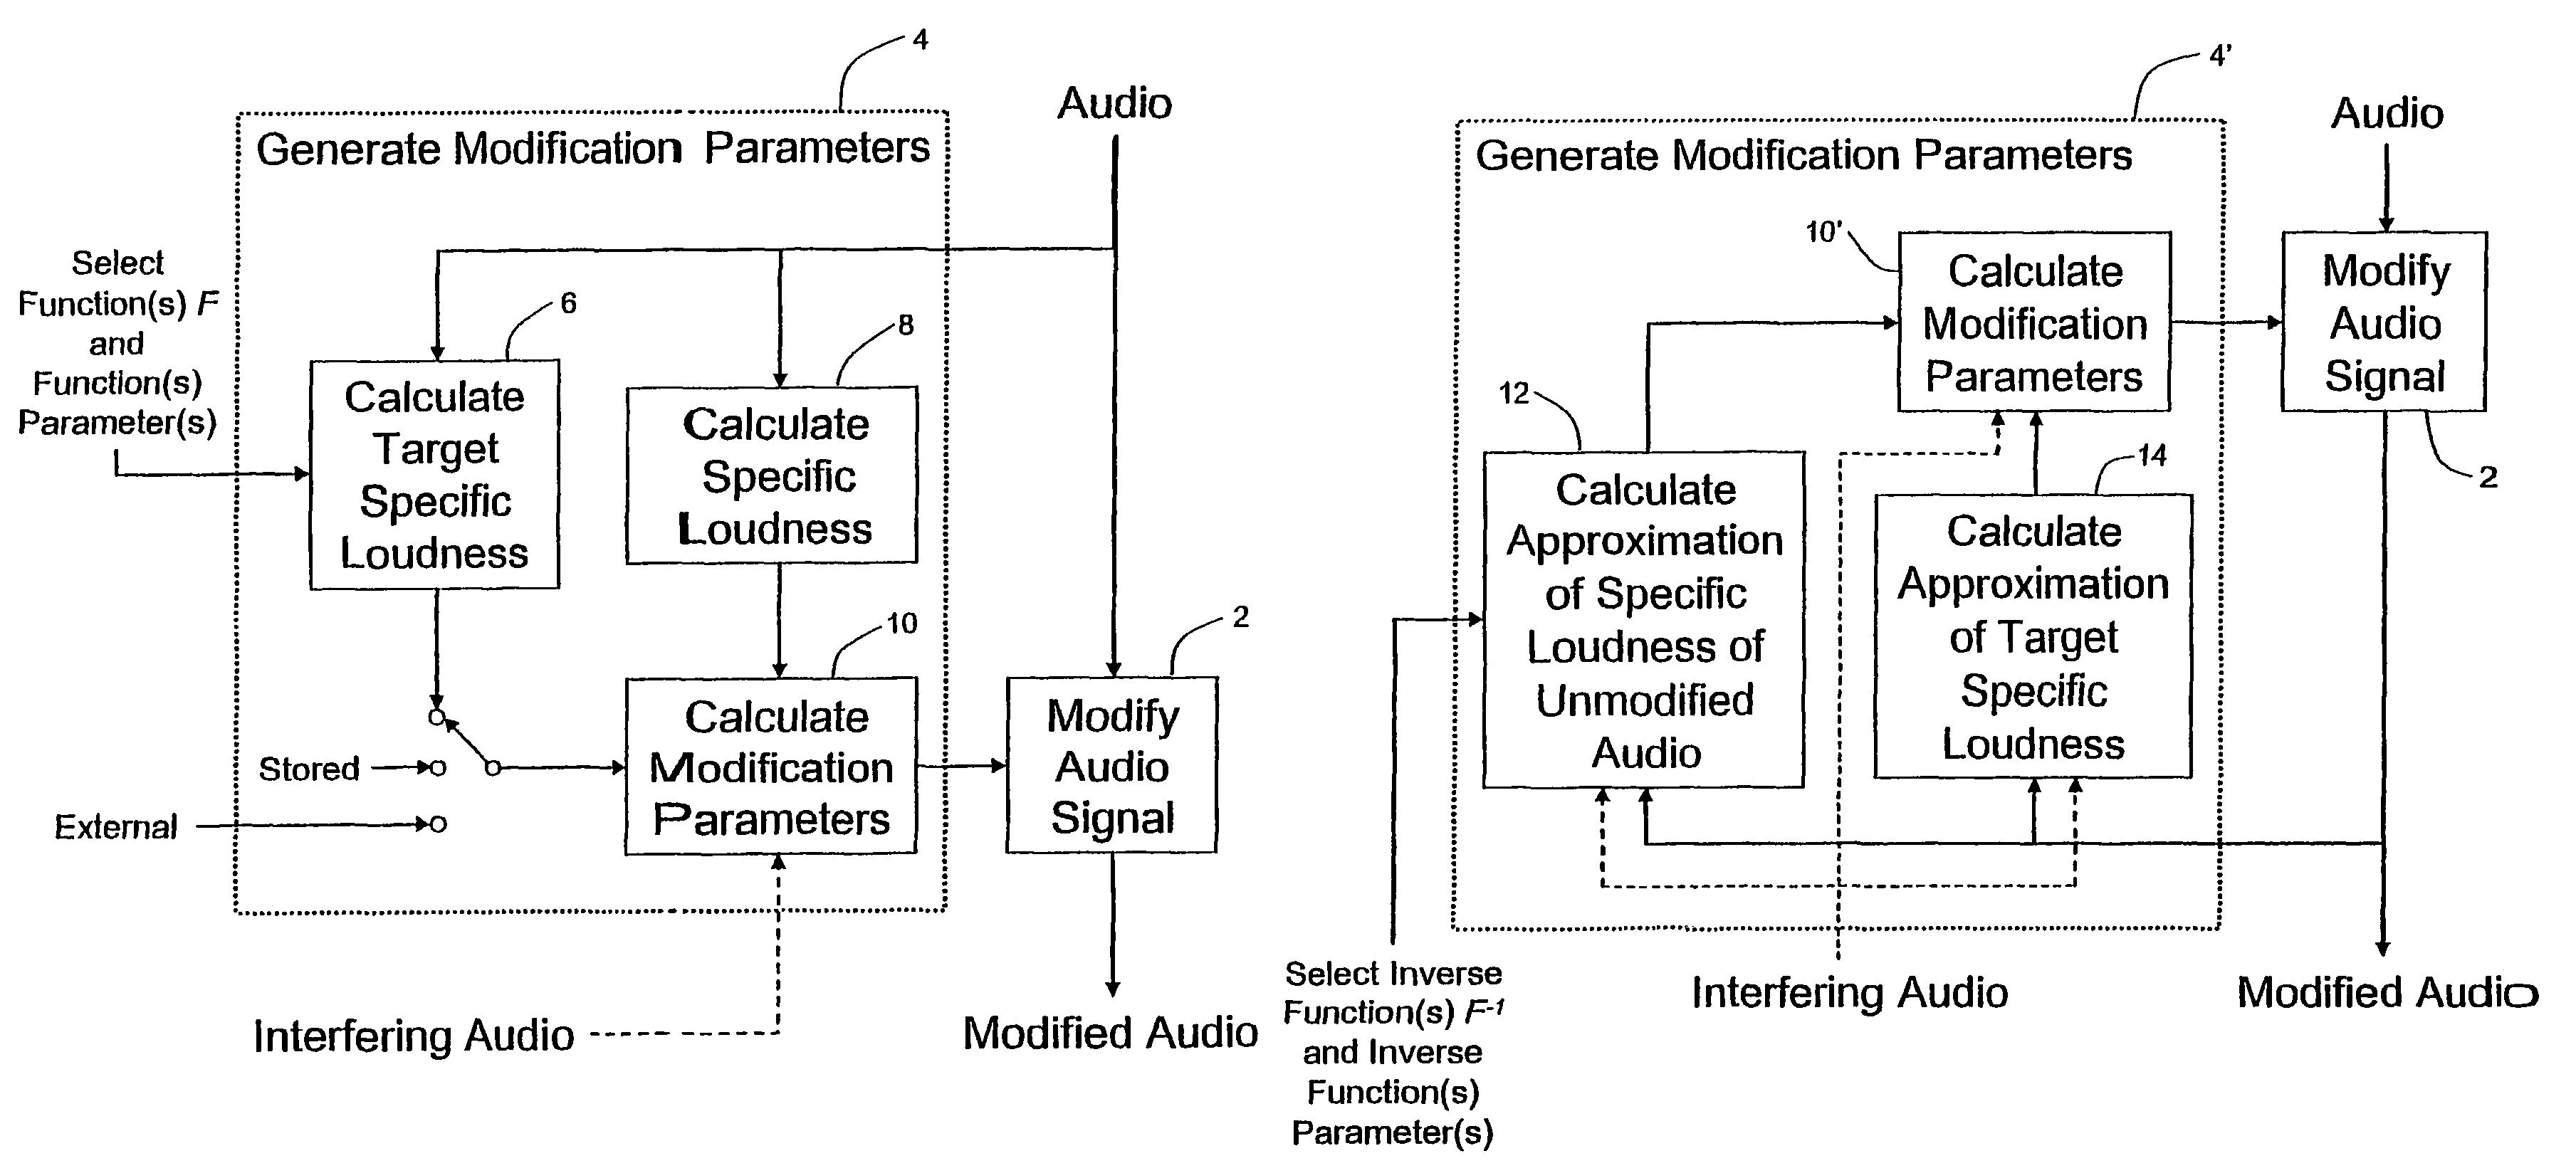 Calculating and adjusting the perceived loudness and/or the perceived spectral balance of an audio signal